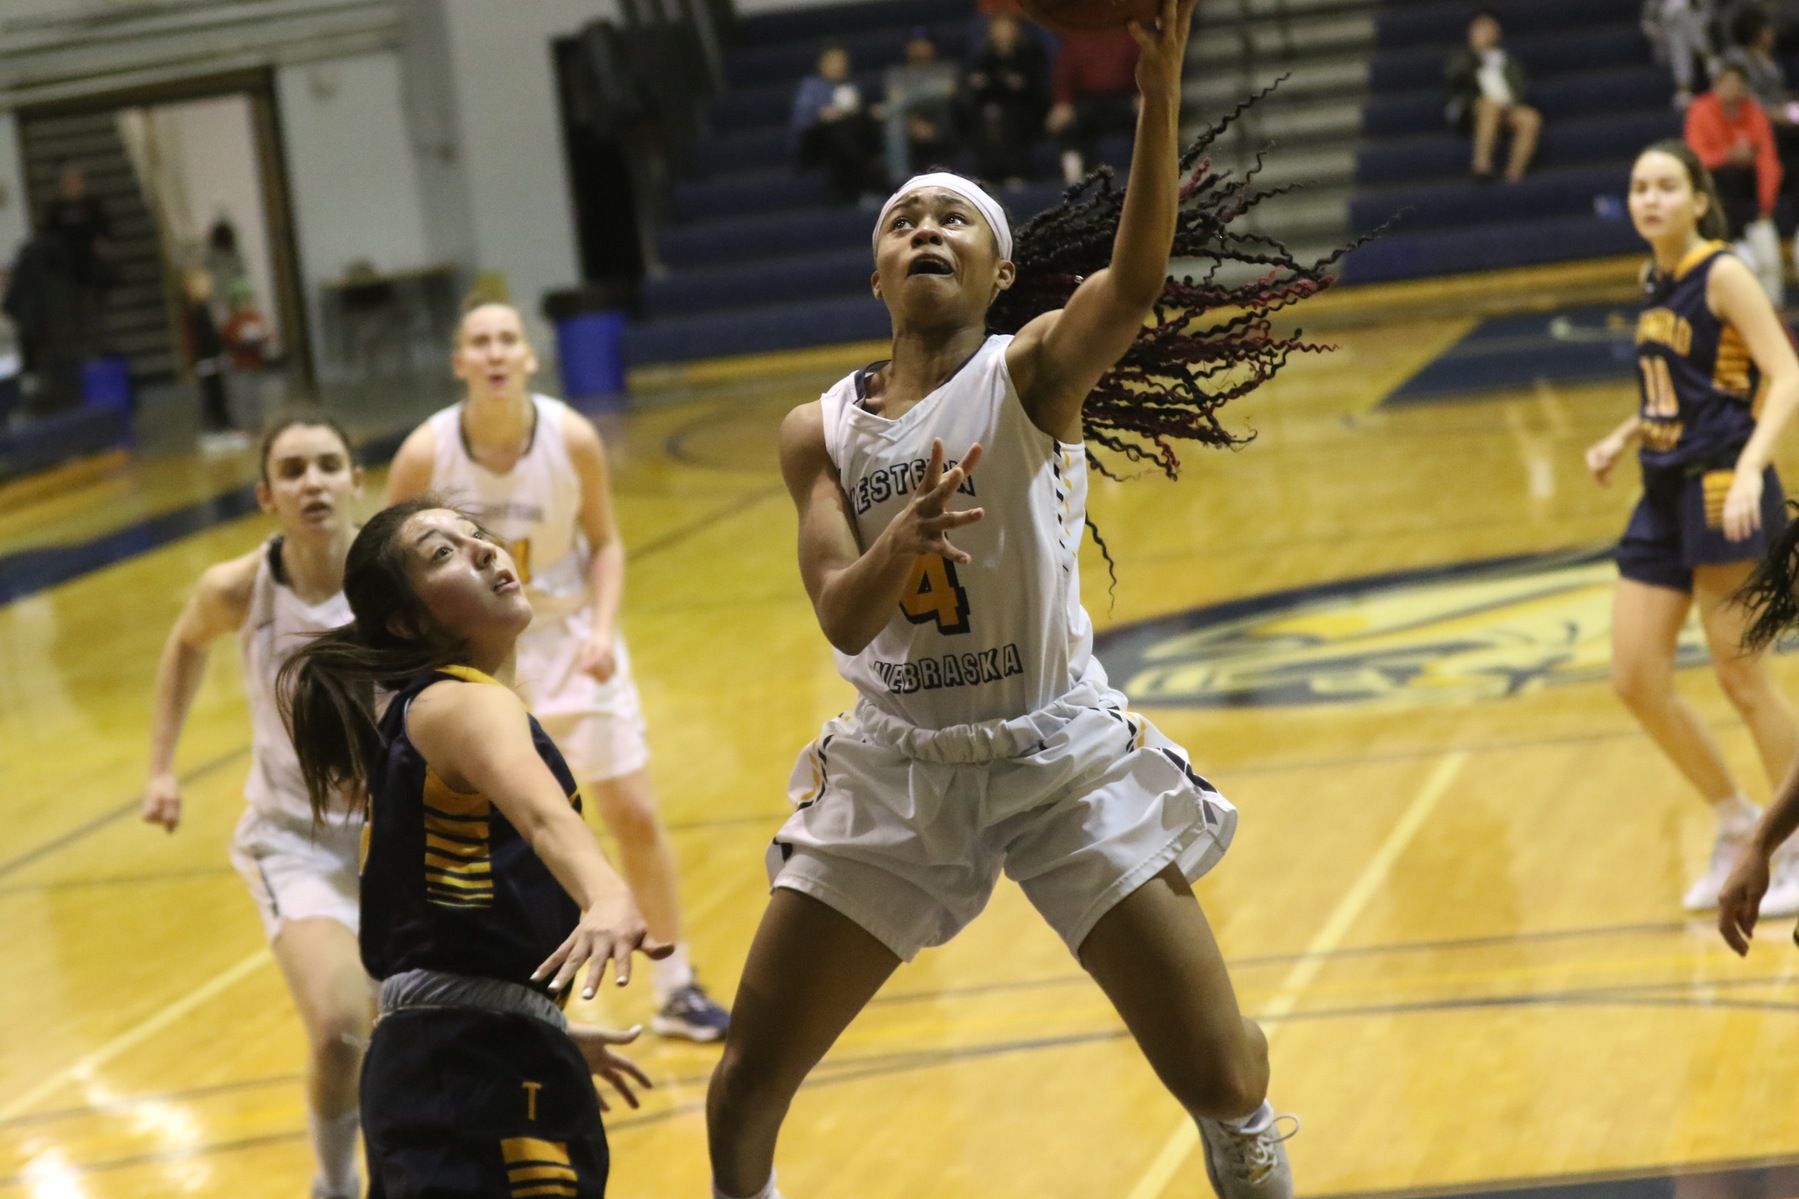 WNCC tops Gillette, moves into tournament title game